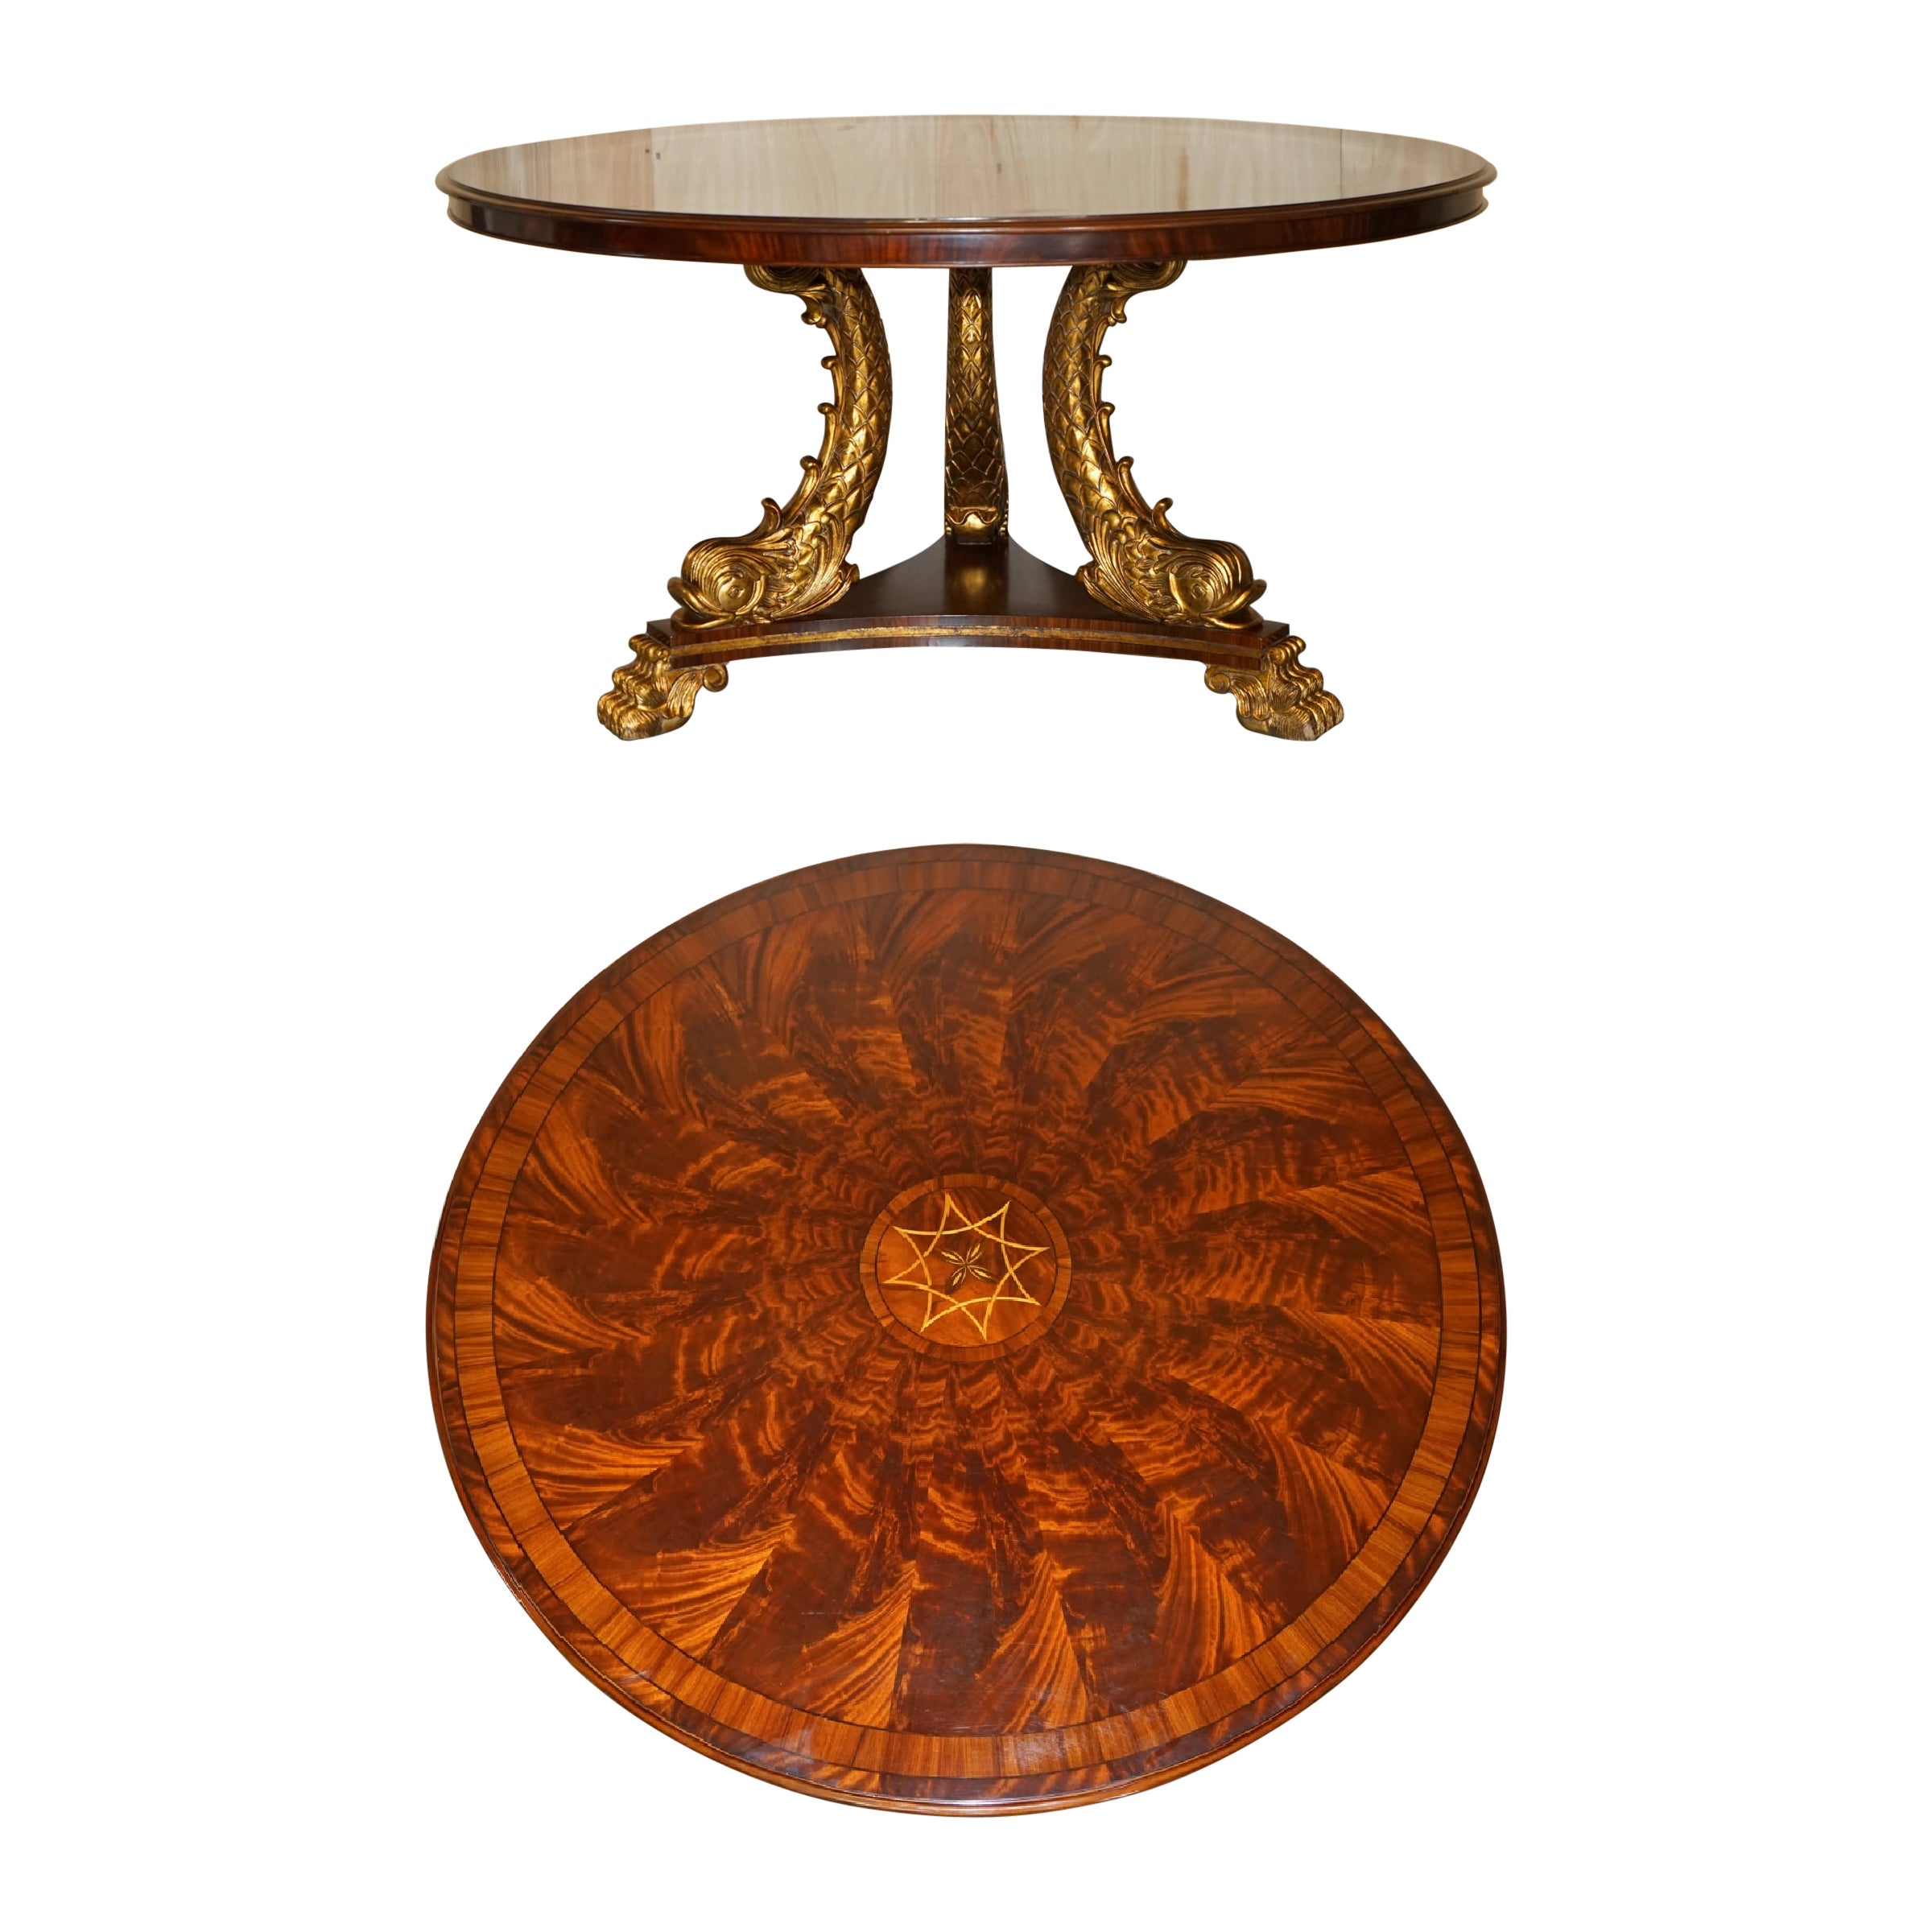 Exquisite Regency Style Gold Giltwood Dolphin Dining Table Flamed Hardwood Top For Sale